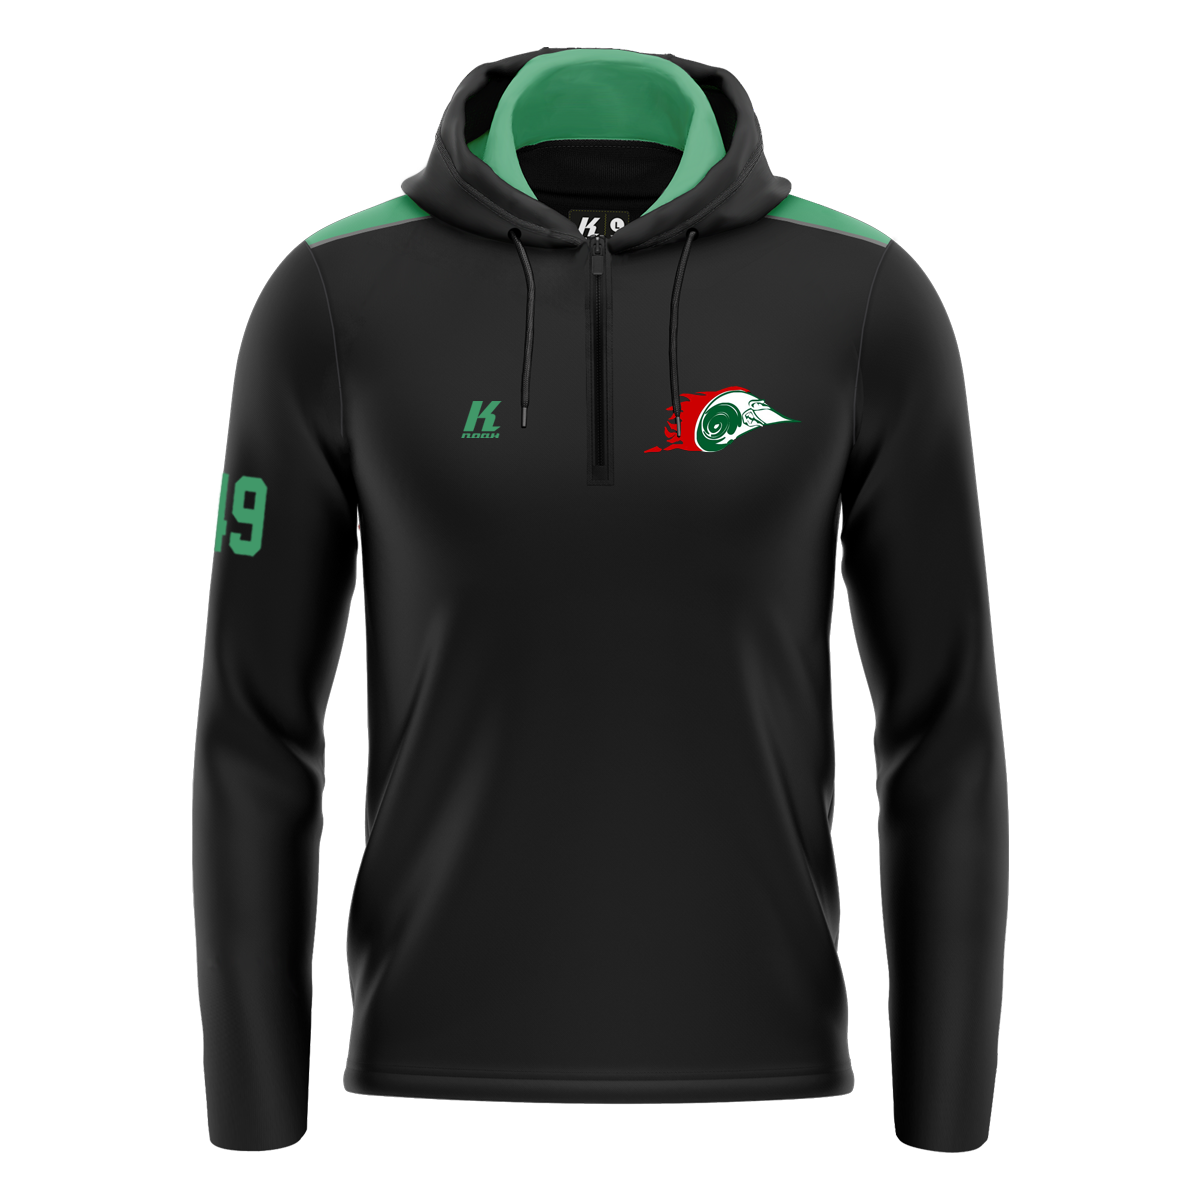 X-Press K.Tech-Fiber Hoodie “Heritage” with Playernumber/Initials